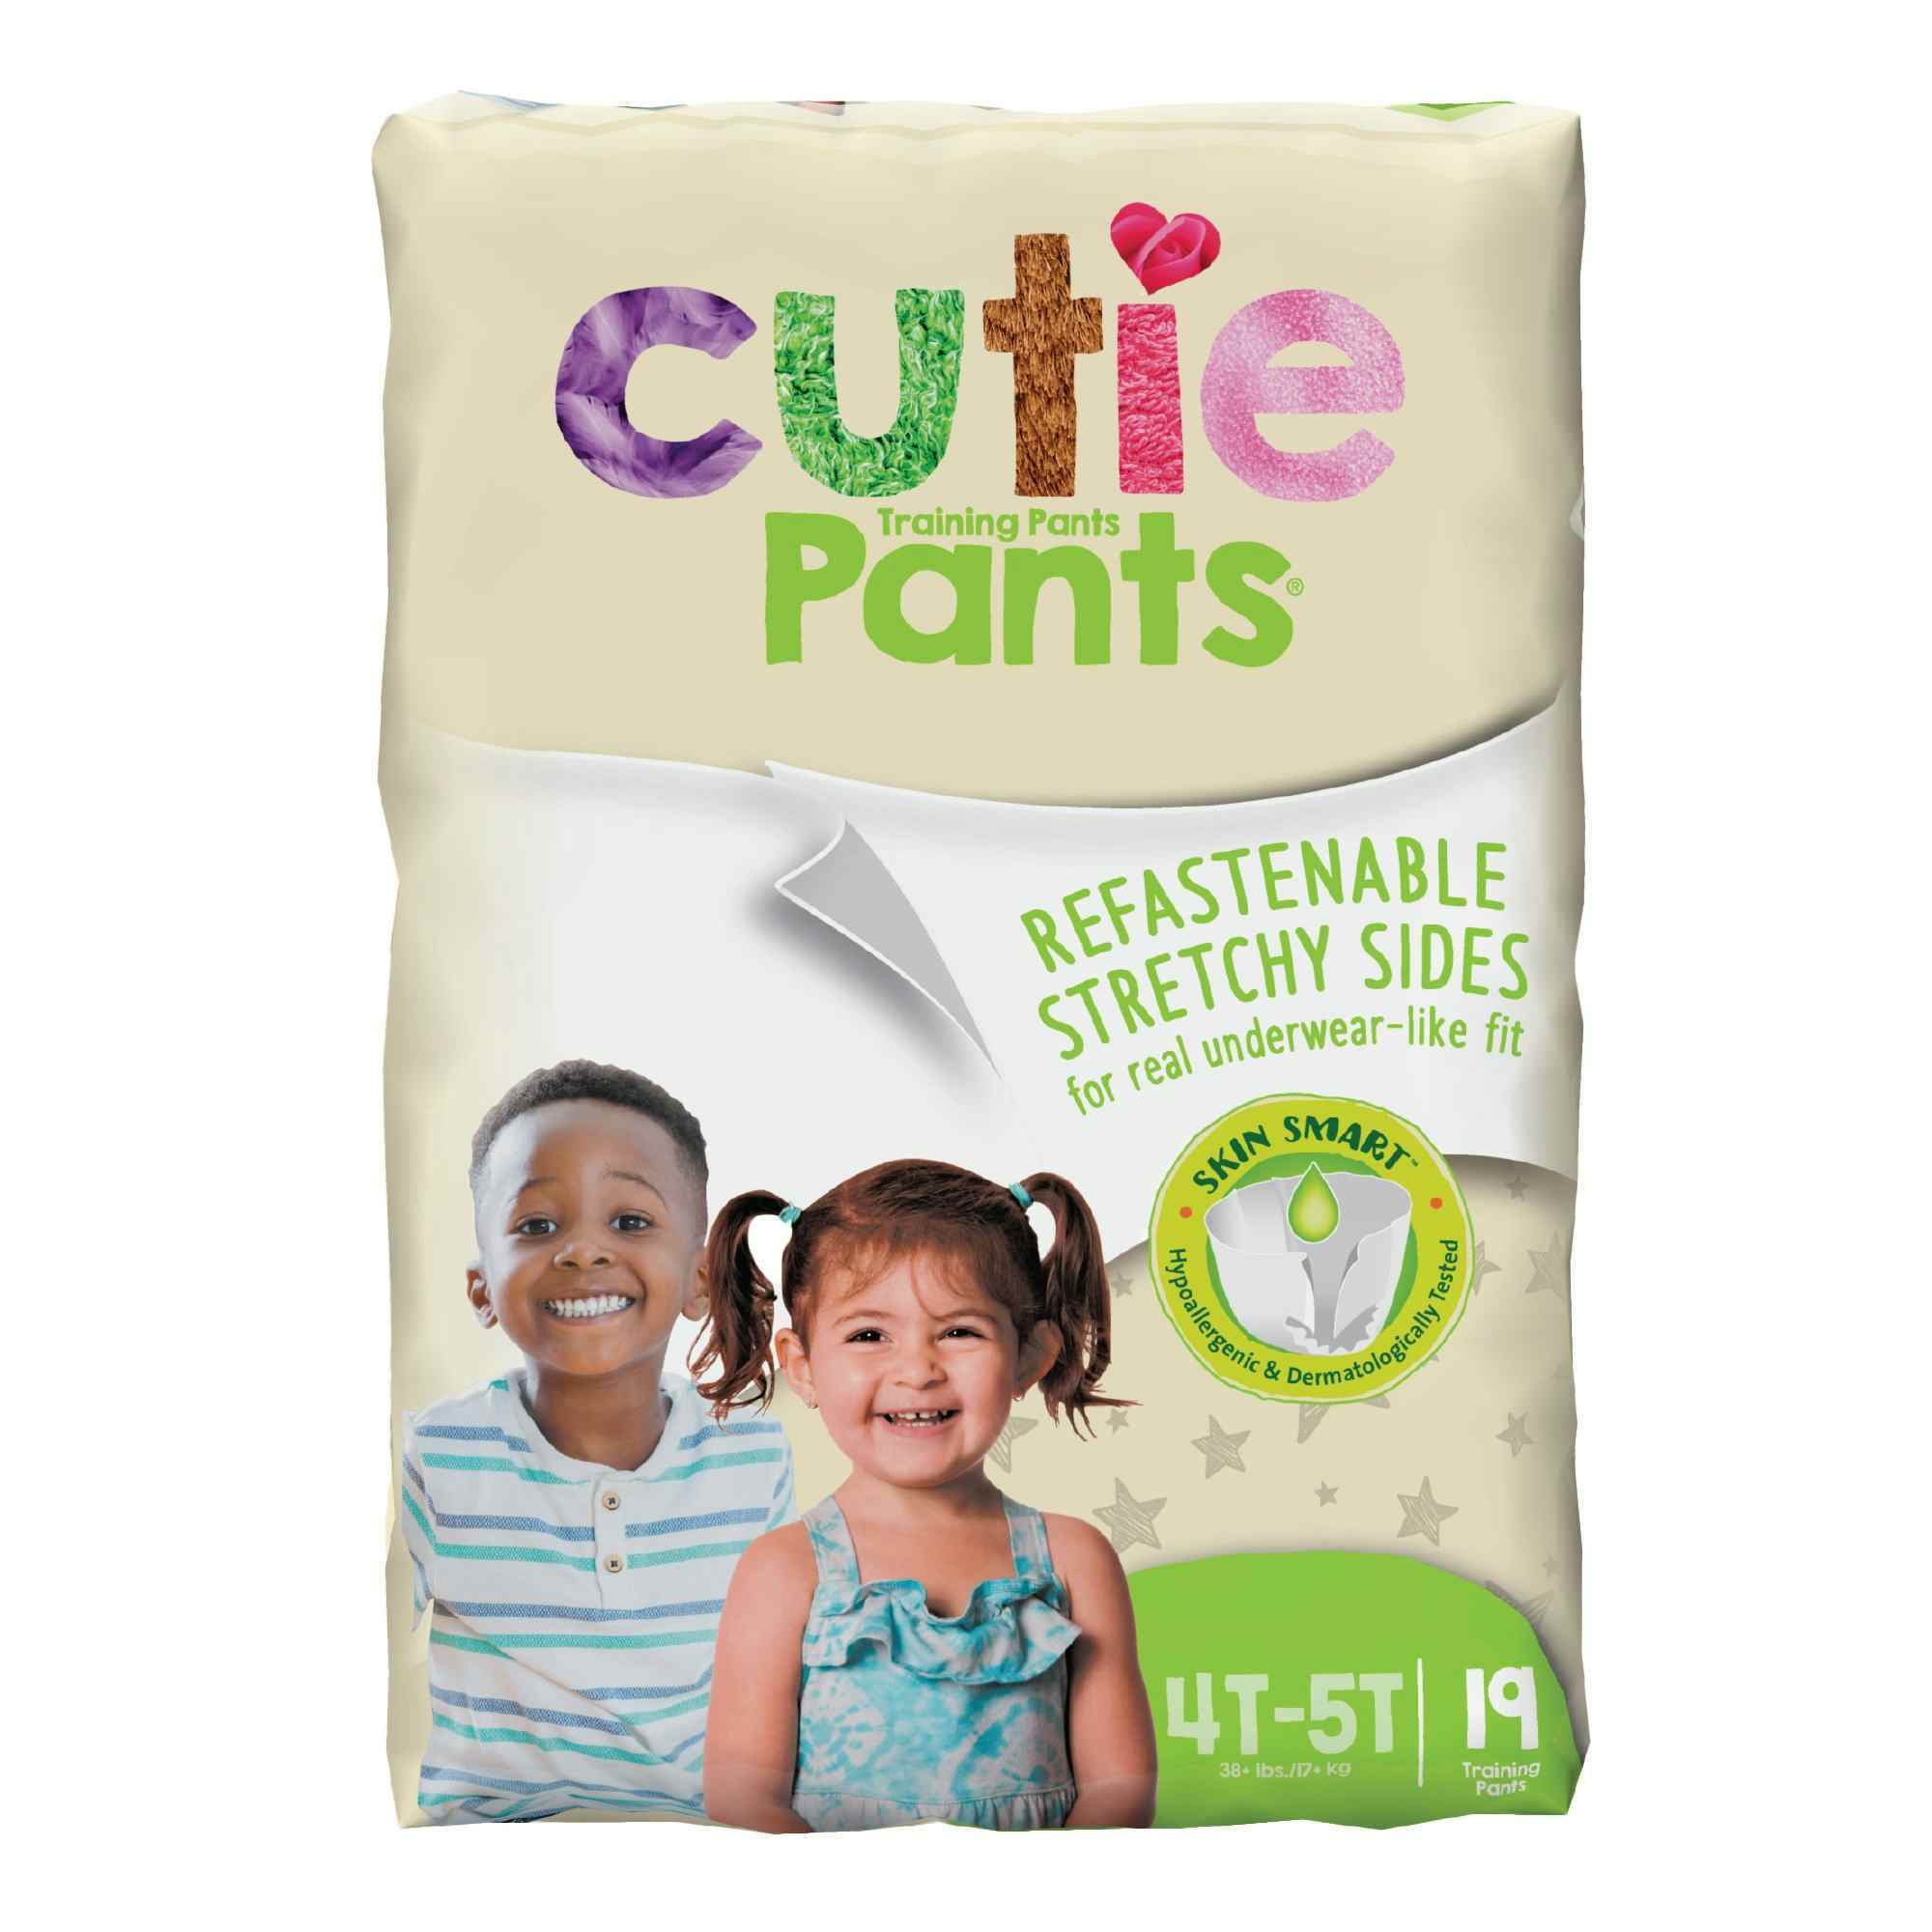 Cutie Pants Toddler Disposable Training Pants Pull ups, Heavy, WP9001/1, Size 4T-5T Over 35 lbs - Case of 76